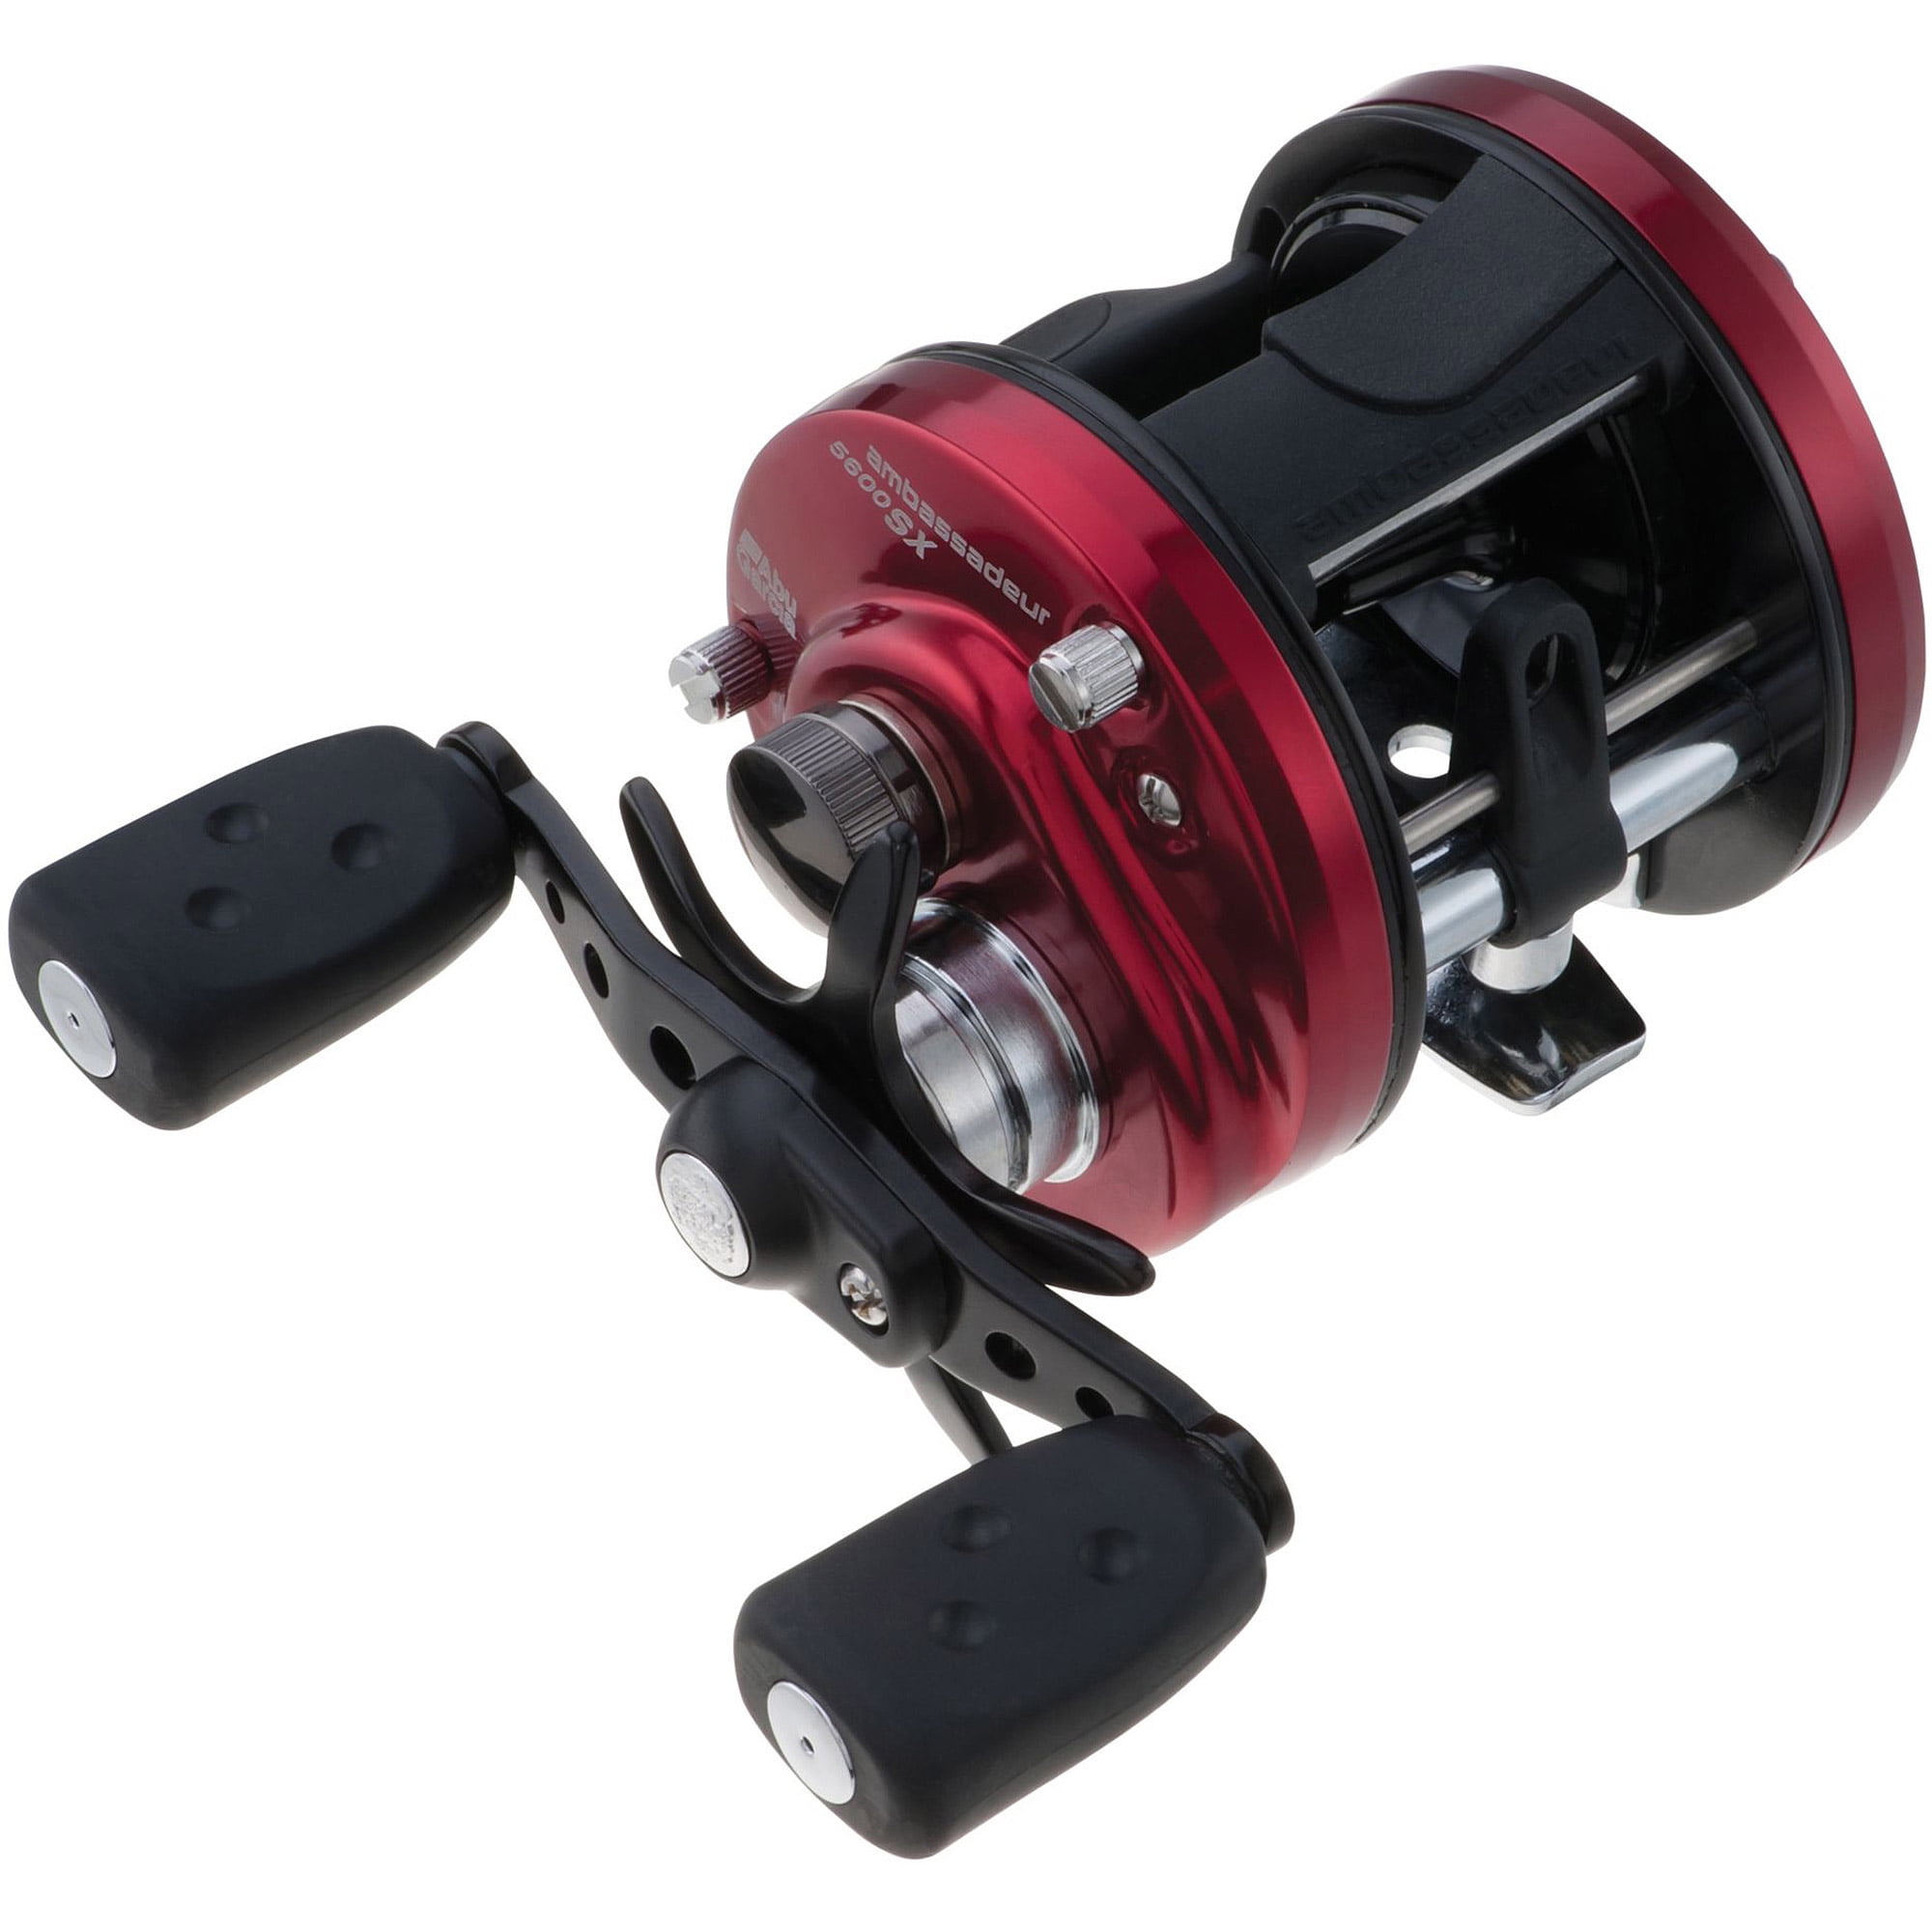 Buy conventional fishing reels Online in UAE at Low Prices at desertcart